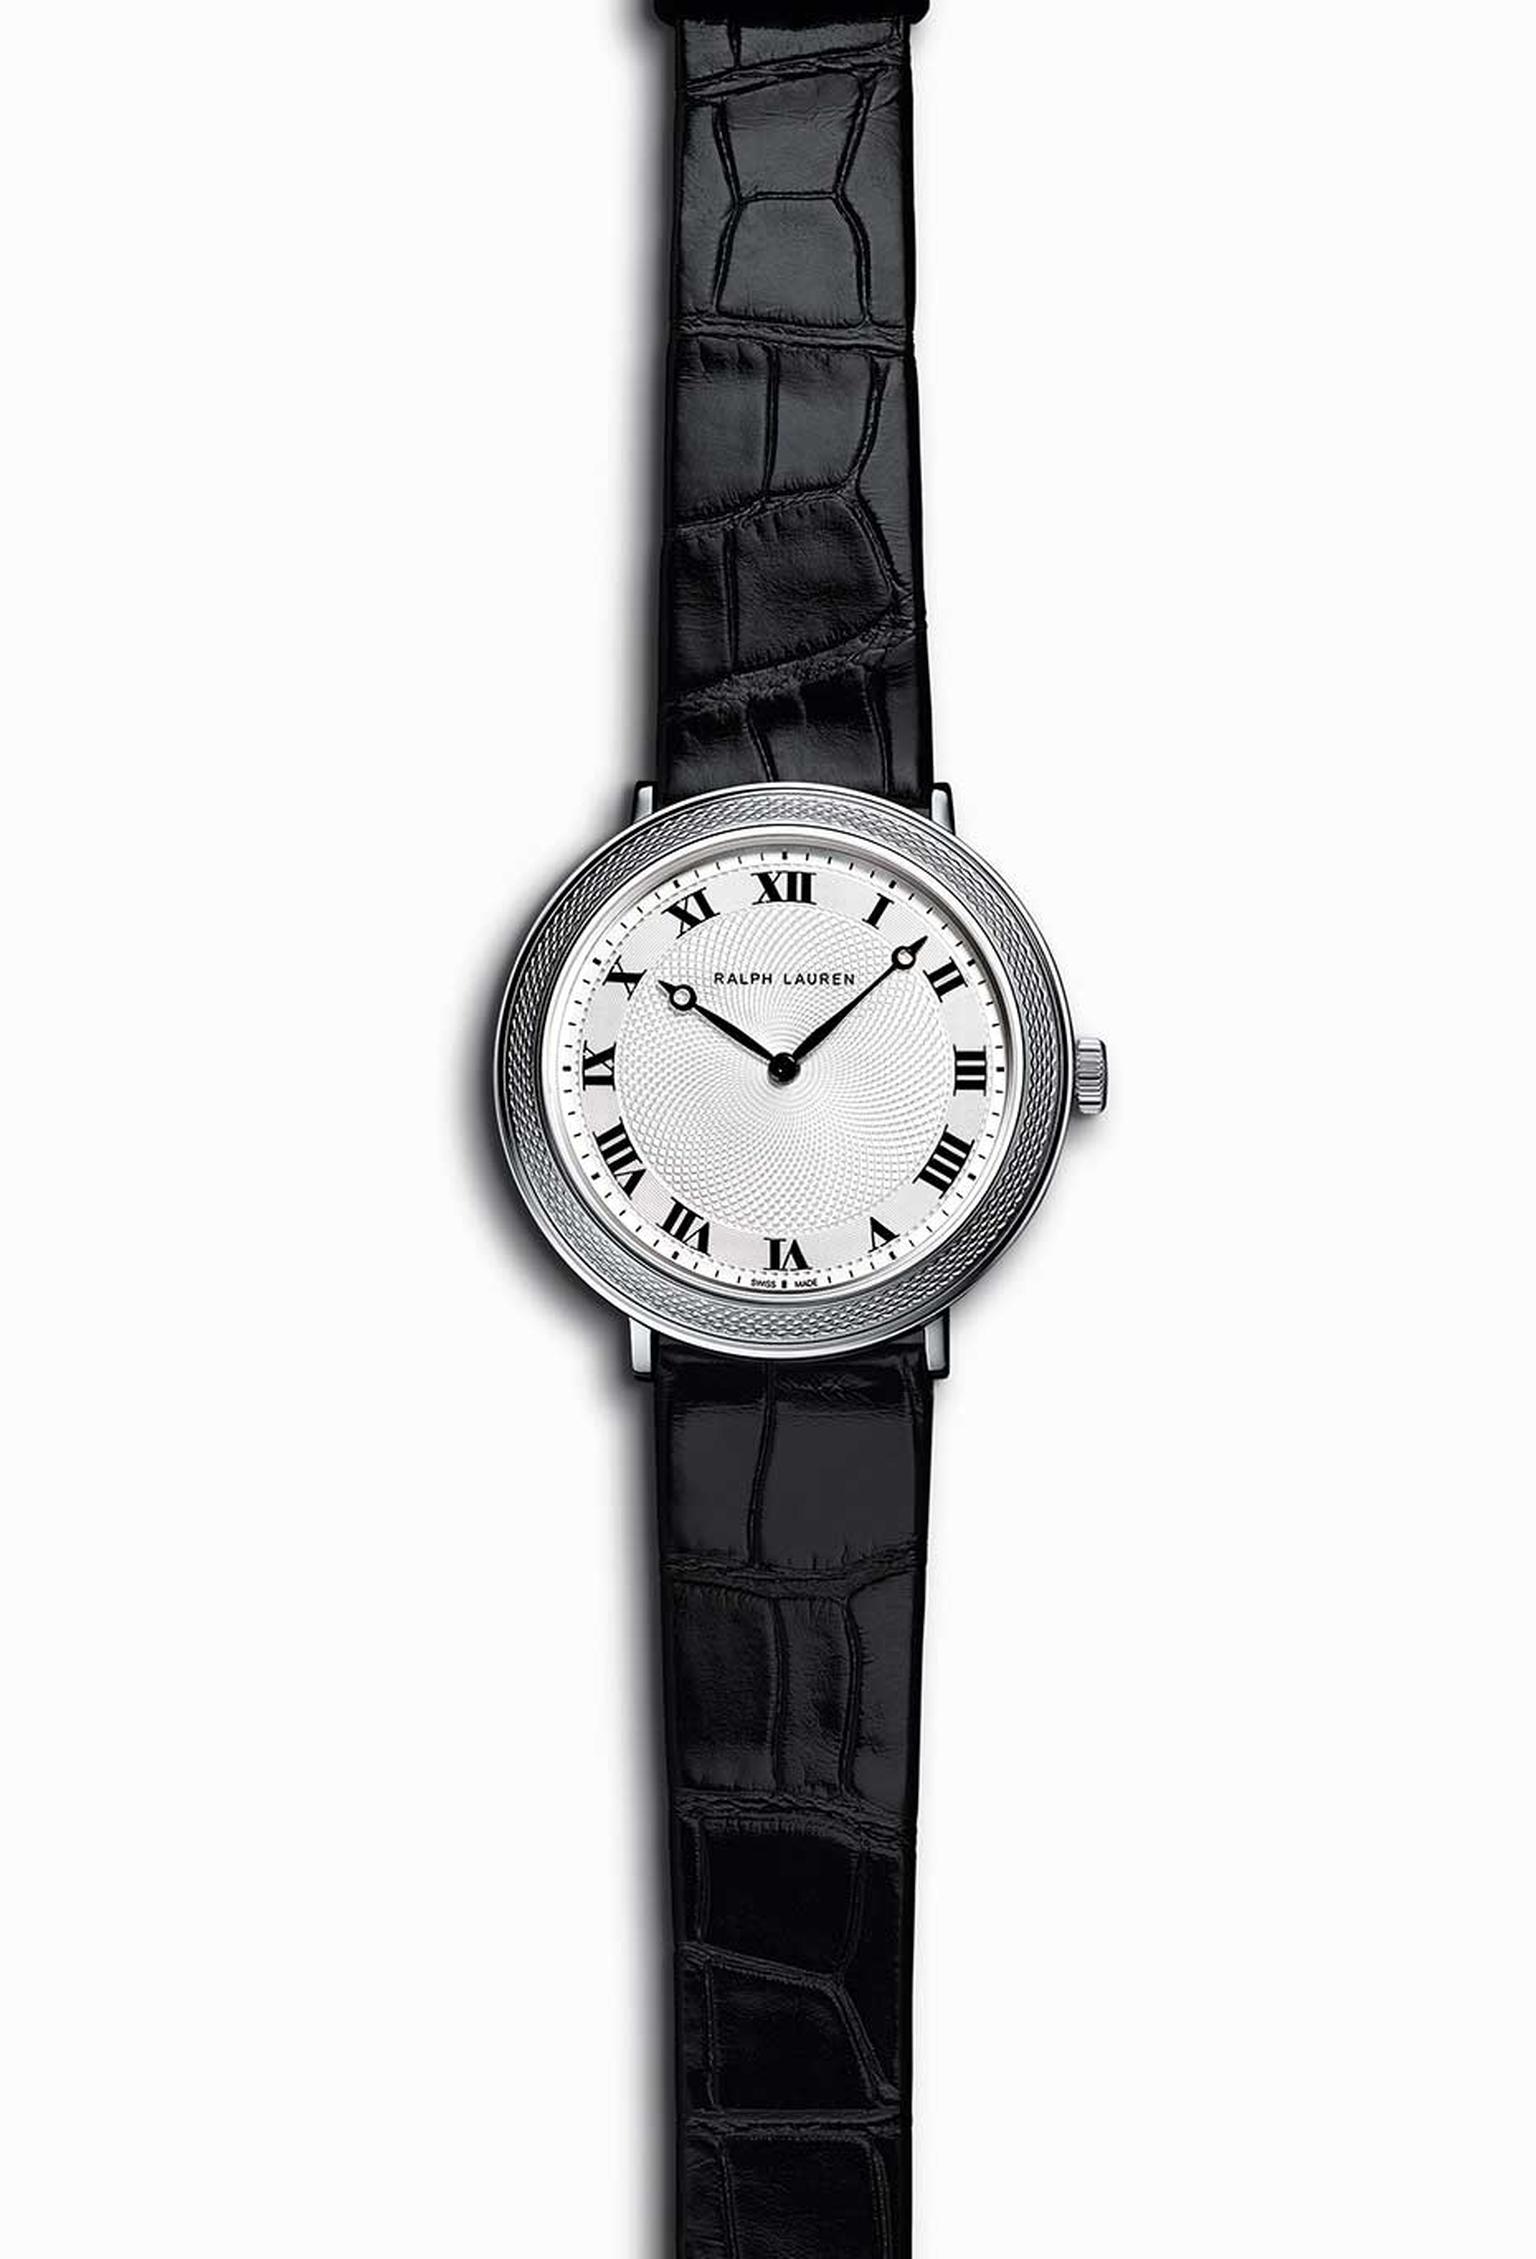 =Ralph Lauren Slim Classique 32mm watch in stainless steel, with intricate guilloché engraving on the bezel